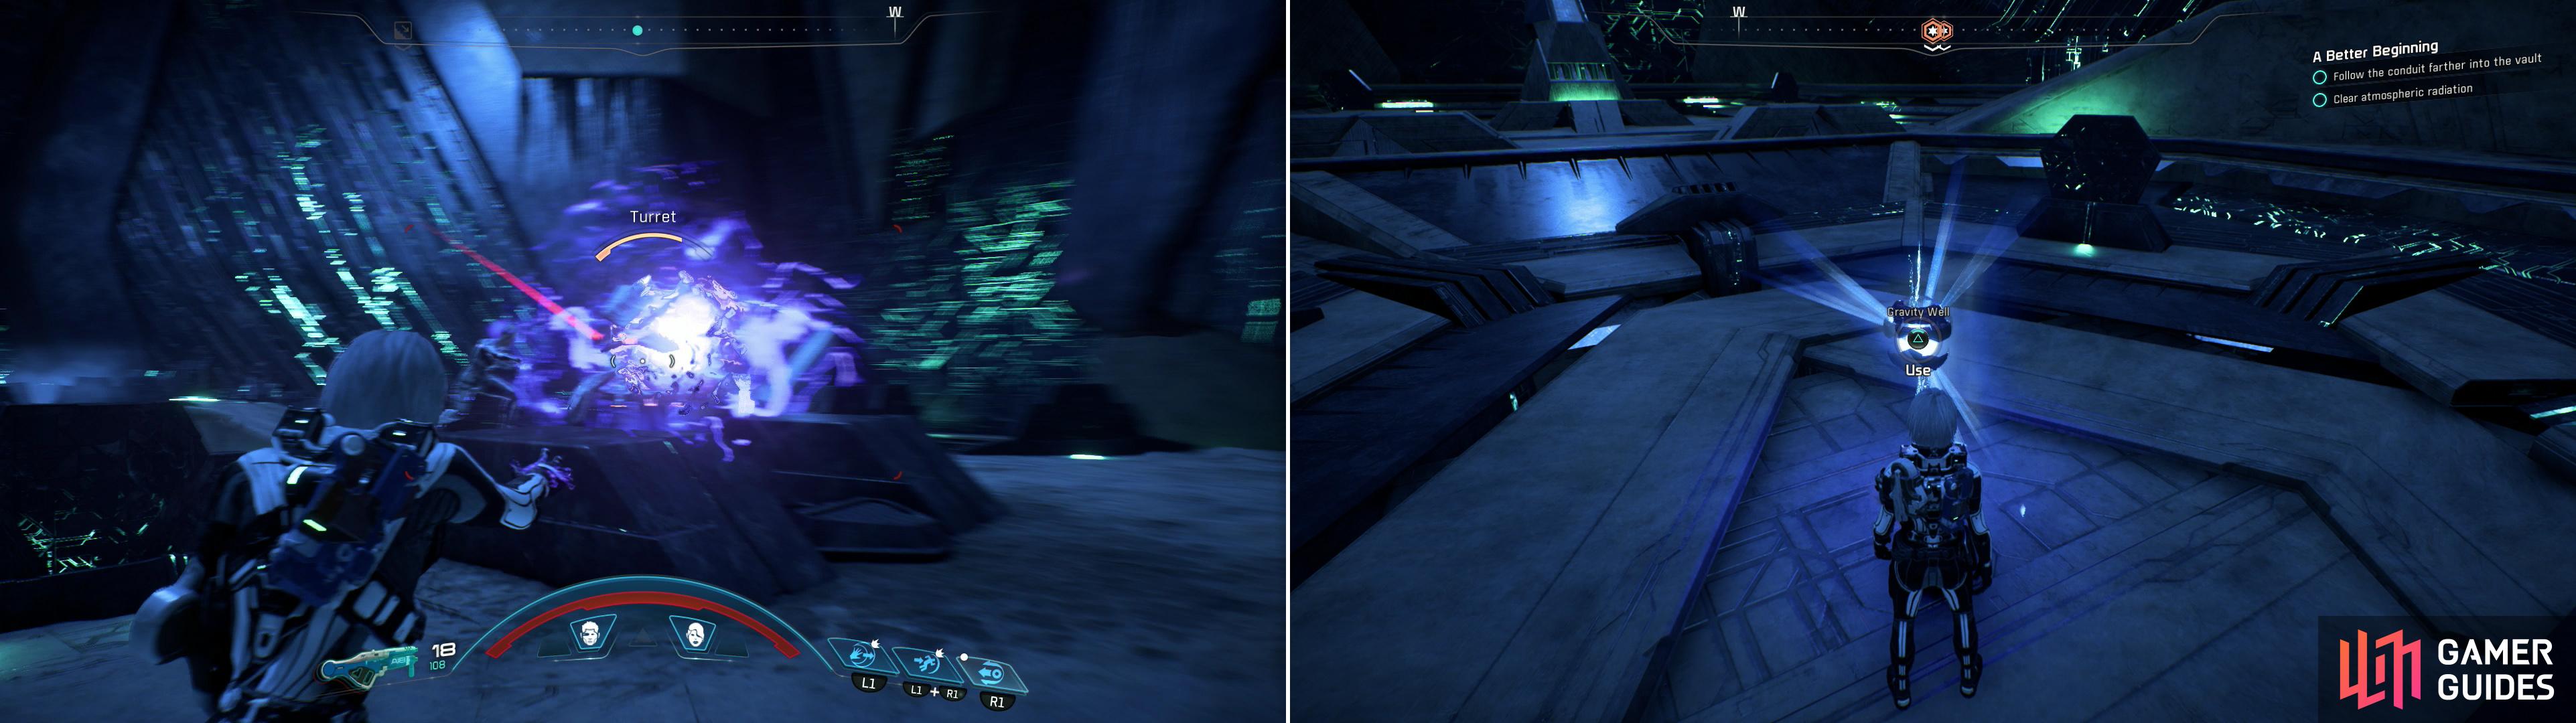 Dispatch the Remnant, including a Turret which guards a Remnant Console (left) then activate said console to summon a second Gravity Well (right).